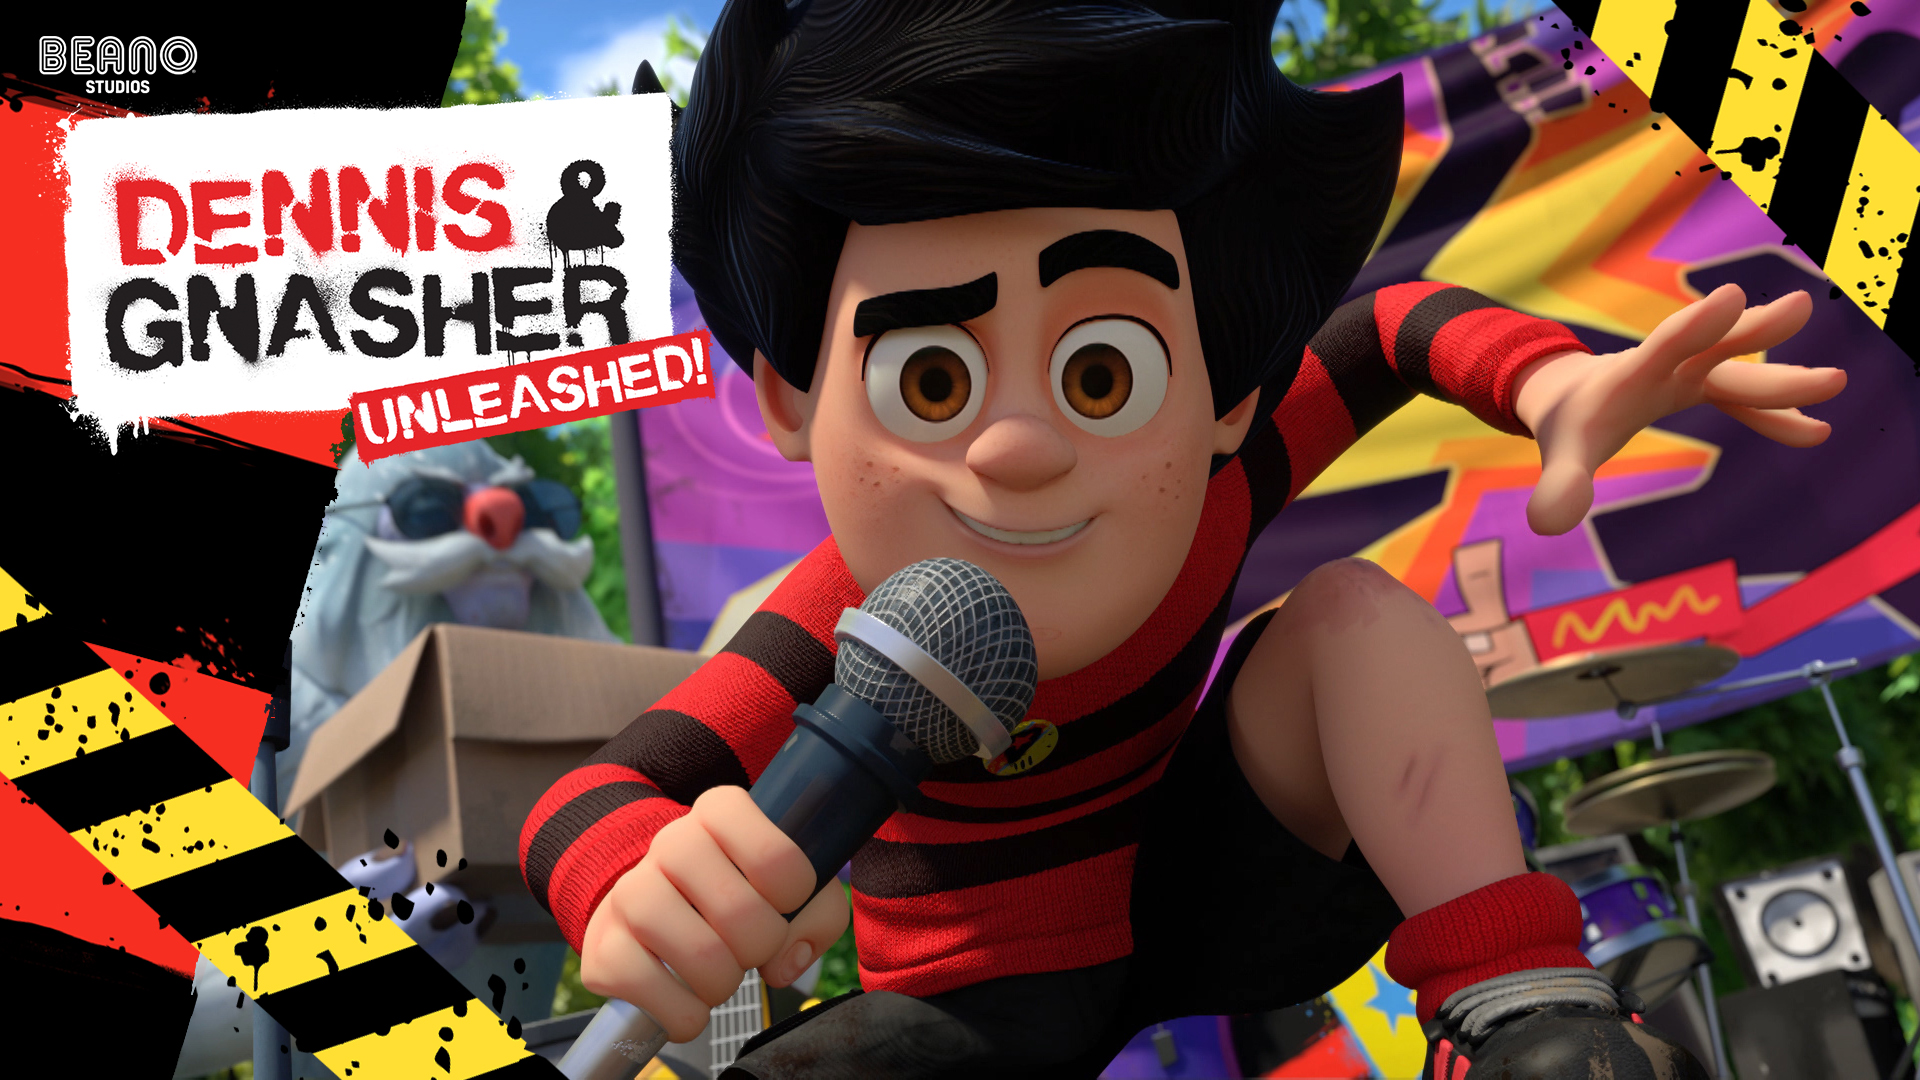 Dennis & Gnasher Unleashed! Series 2 - Episode 12: The Abominable Showman